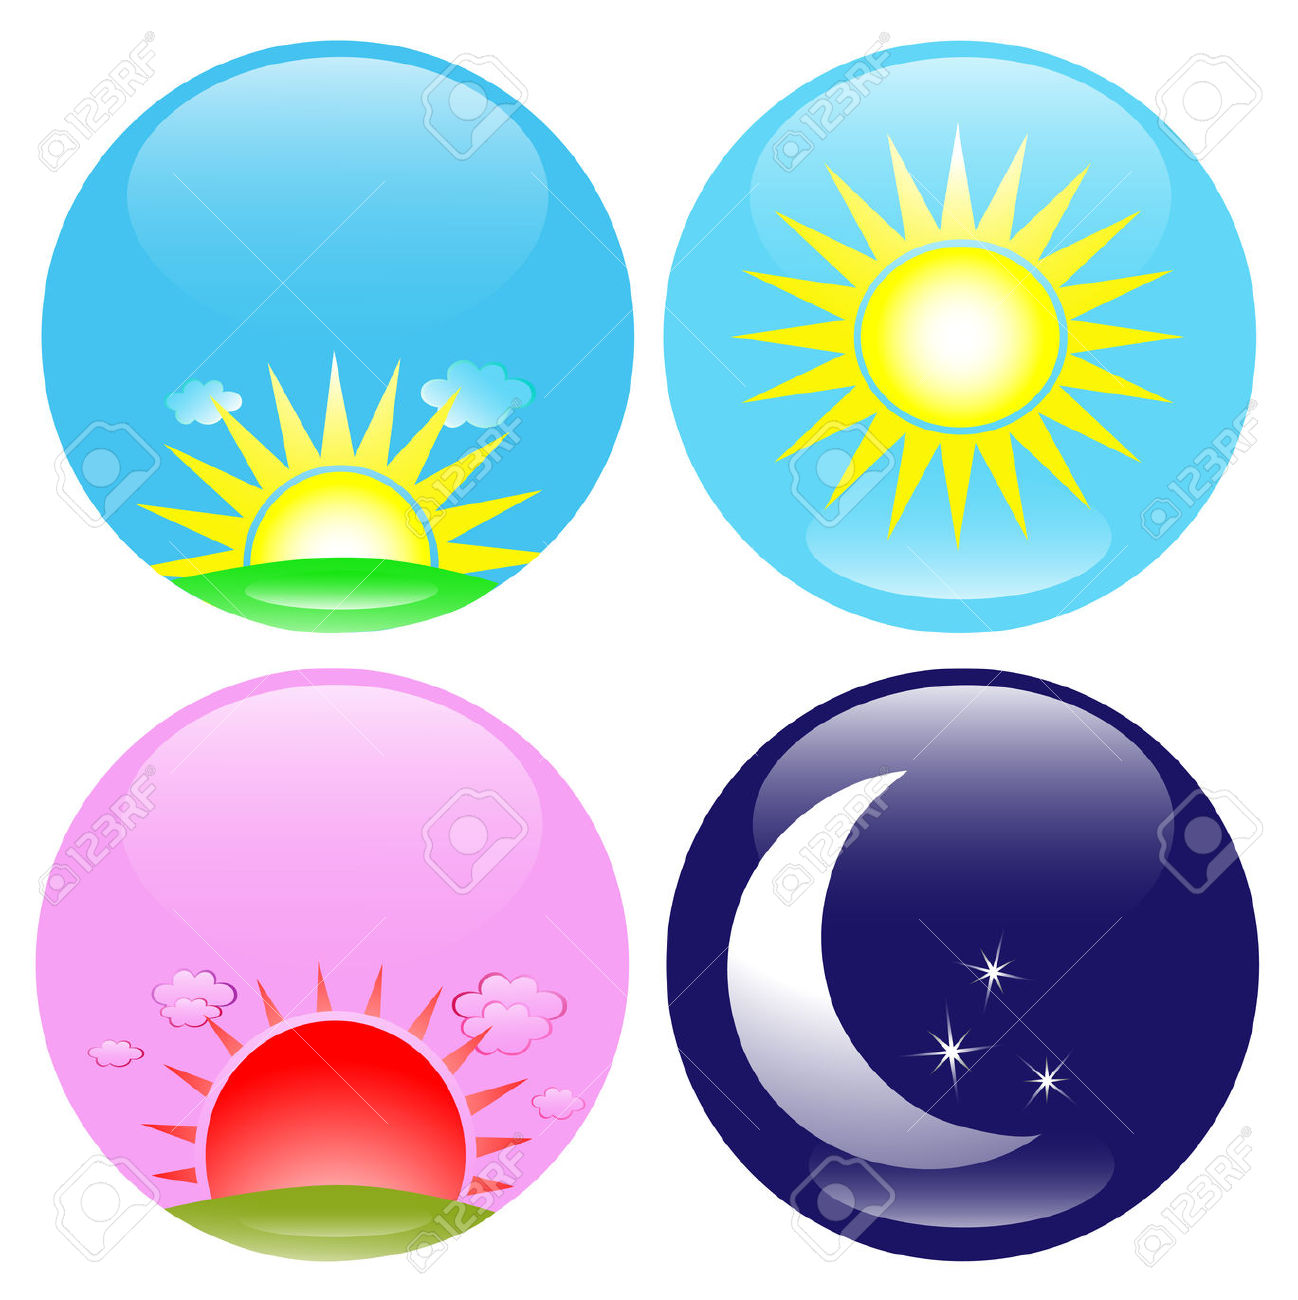 morning afternoon evening clipart - Clip Art Library